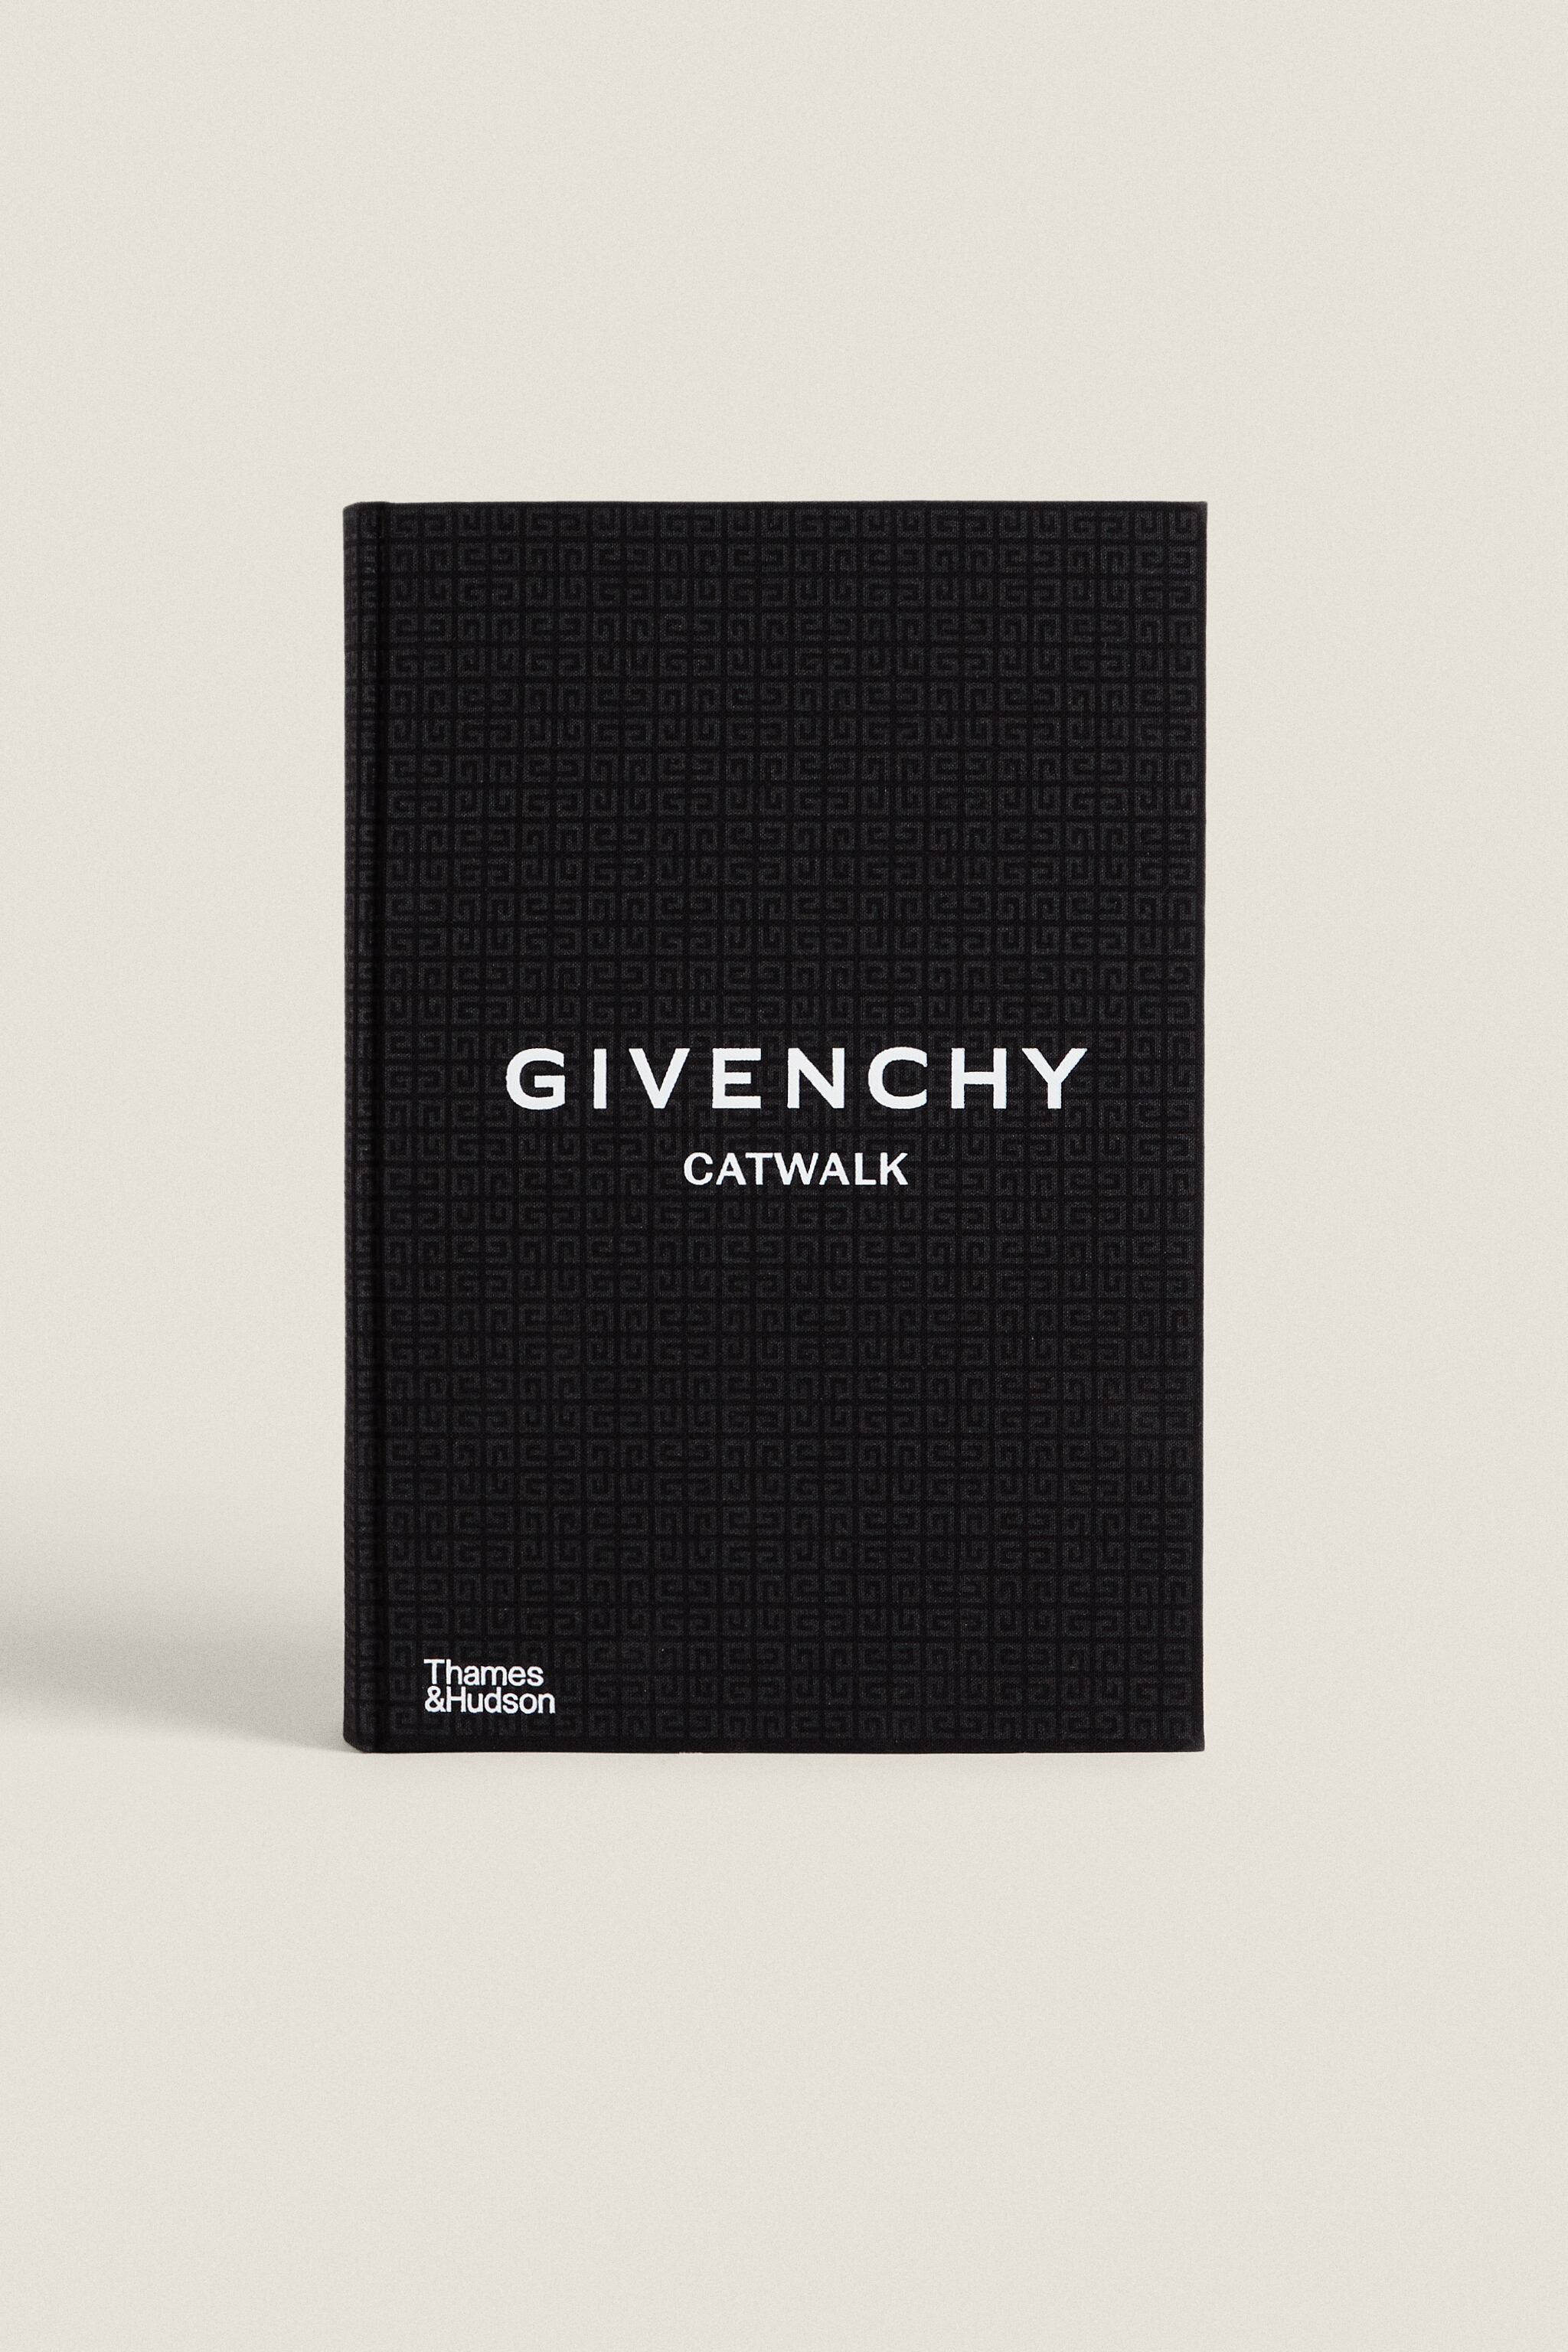 GIVENCHY CATWALK BOOK